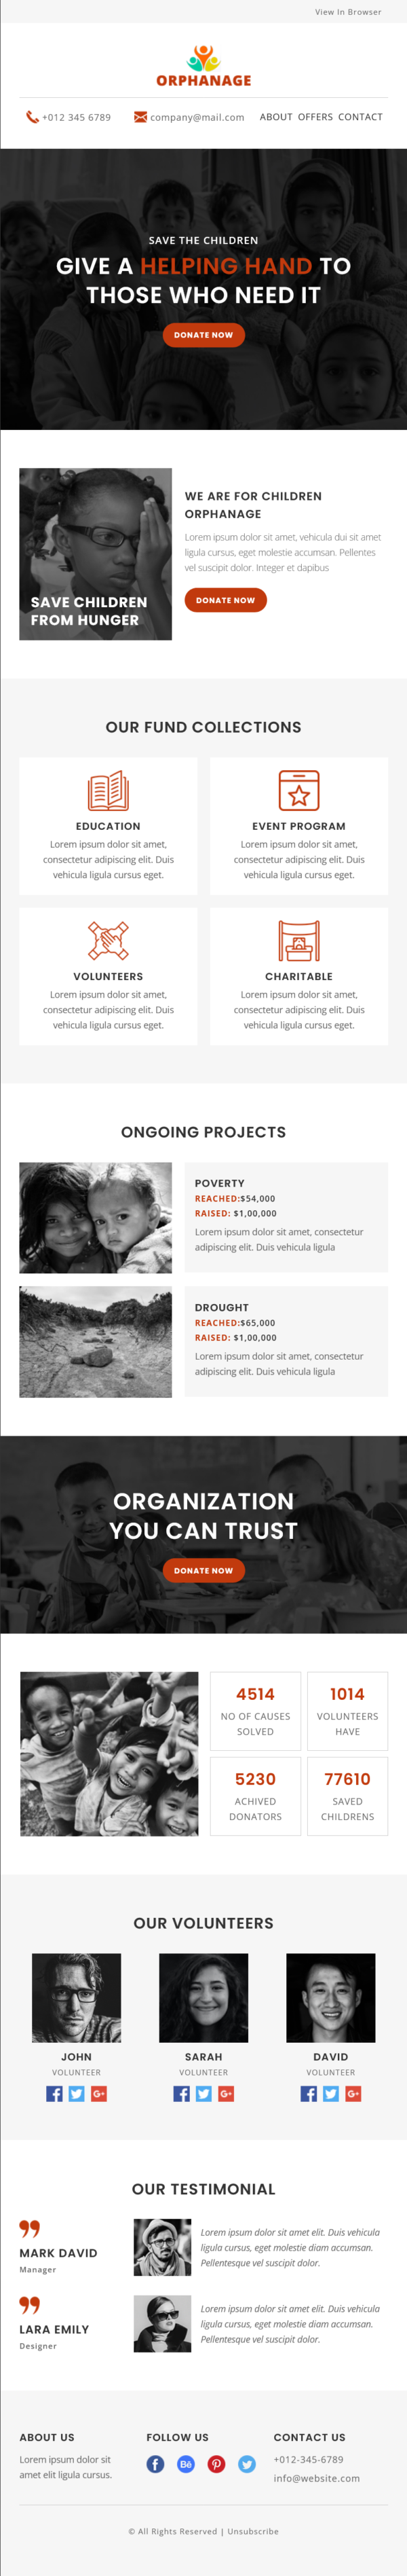 Orphanage - Multipurpose Responsive Email Template